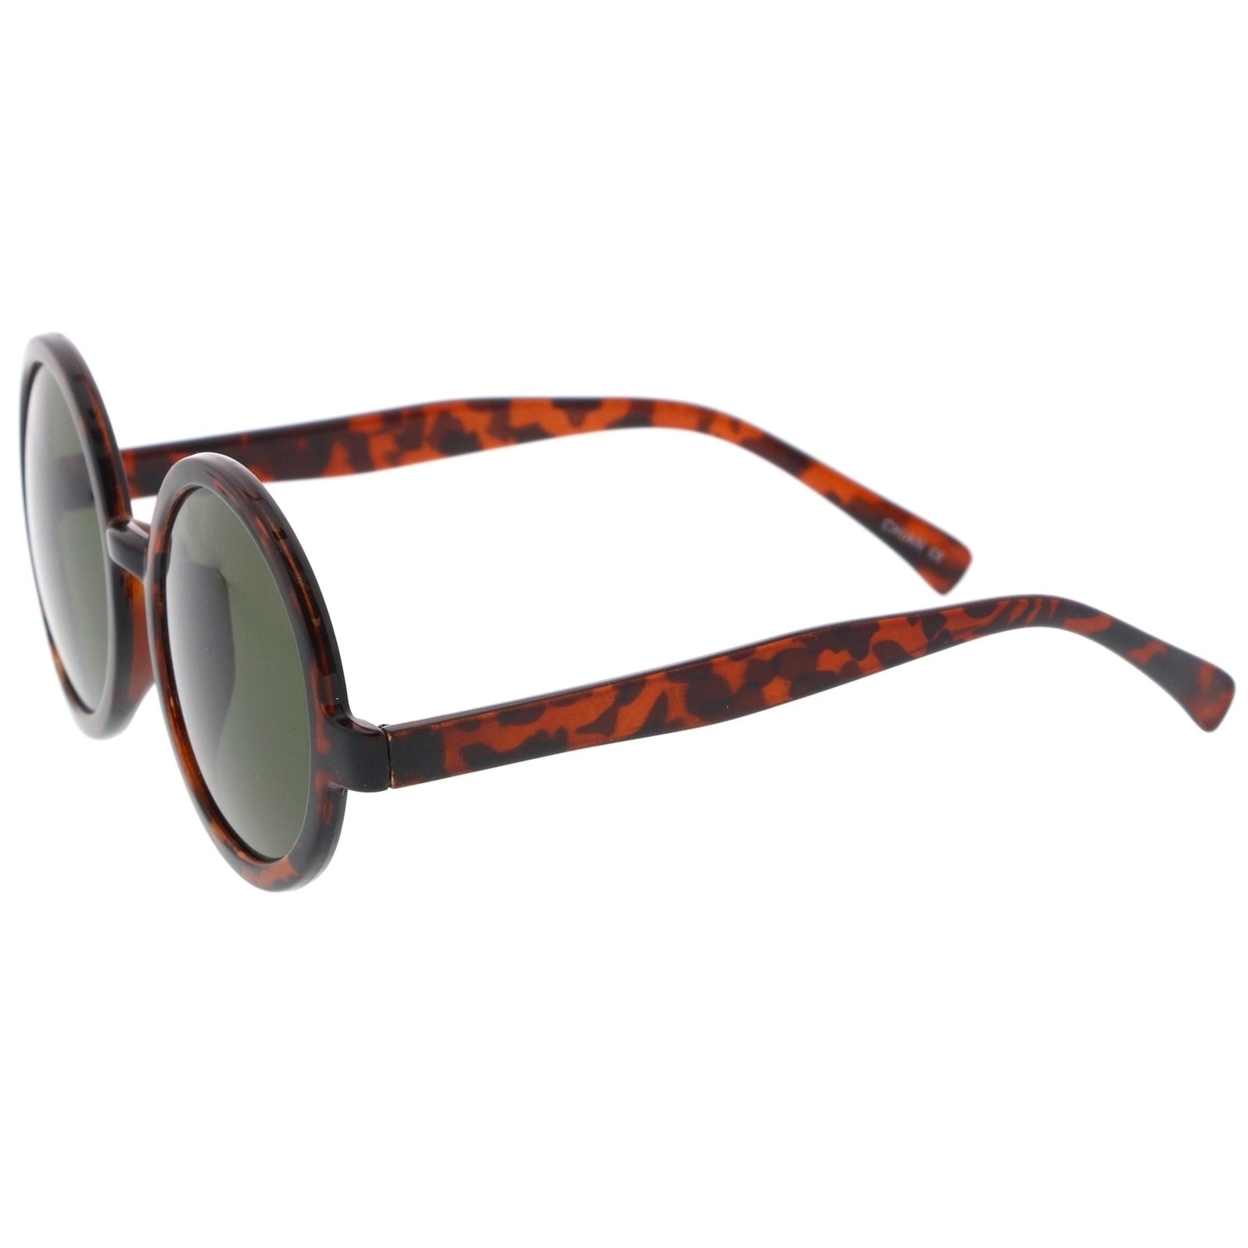 Classic Retro Horn Rimmed Neutral-Colored Lens Round Sunglasses 52mm - Tortoise / Amber